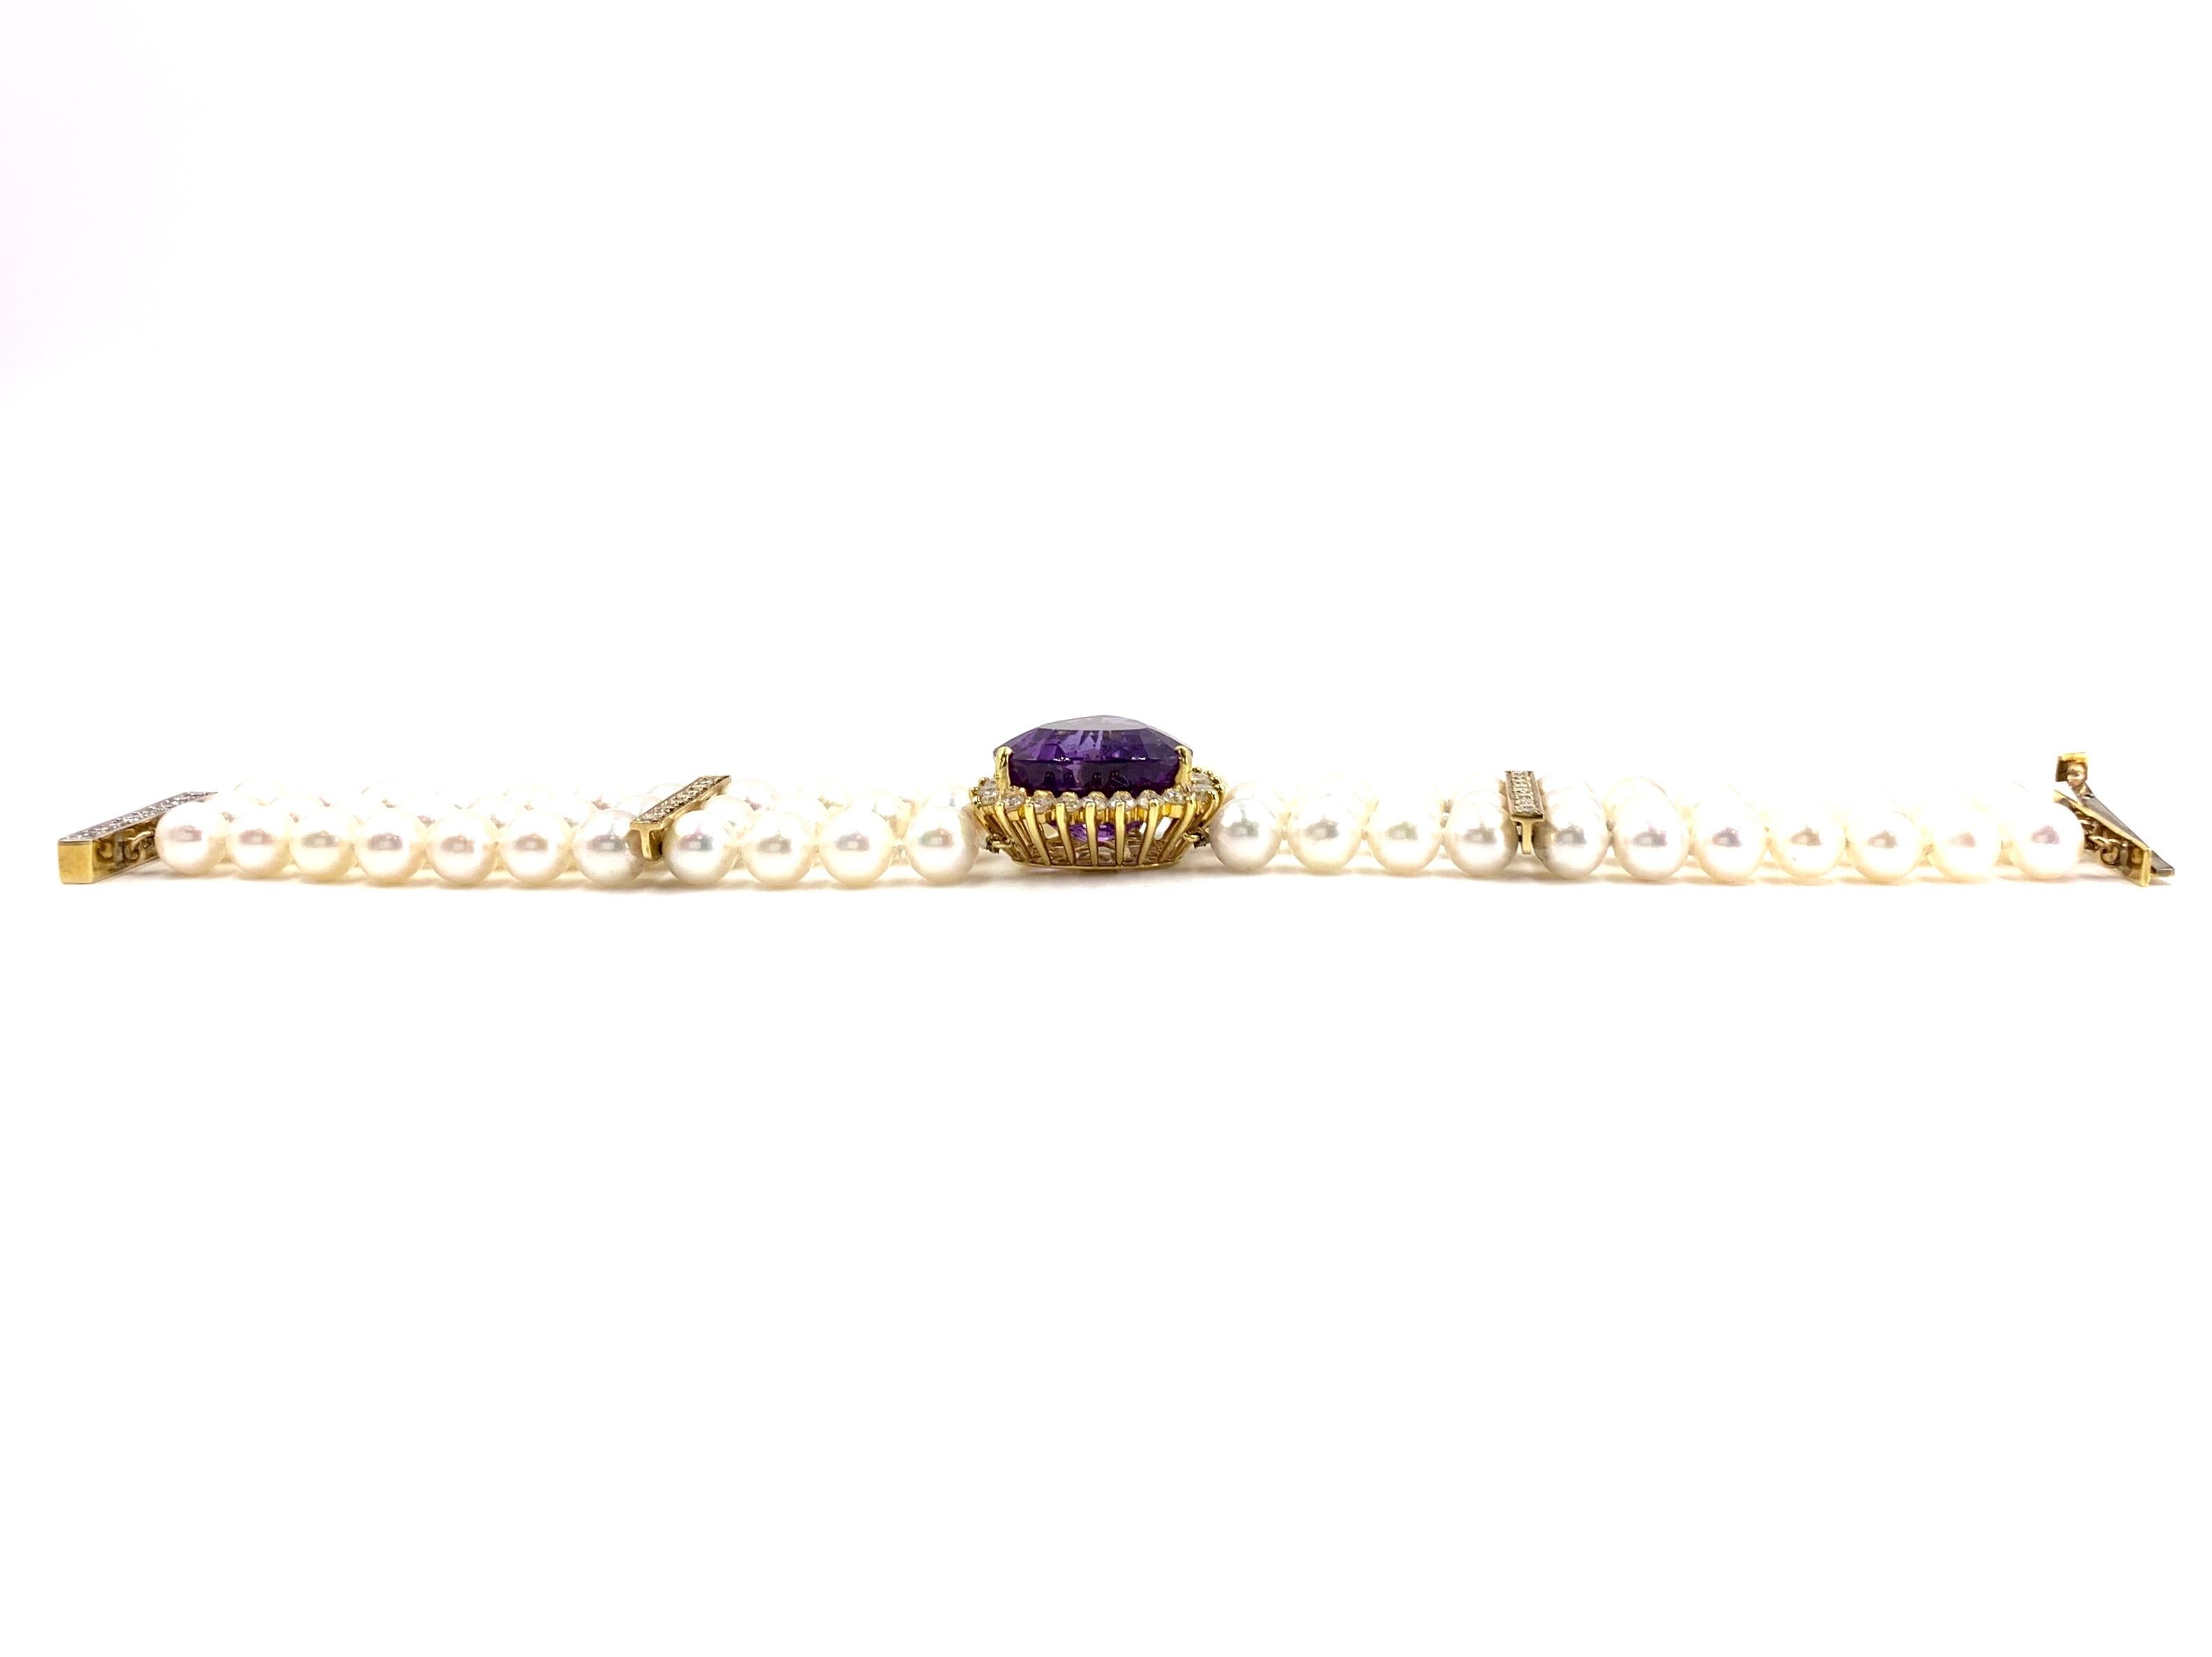 Gorgeous statement three strand cultured pearl bracelet featuring a 21.06 carat pear shaped amethyst and 2.70 carats of white diamonds. Diamonds are approximately G color, VS2 clarity. Amethyst is of fine quality with strong saturation, excellent